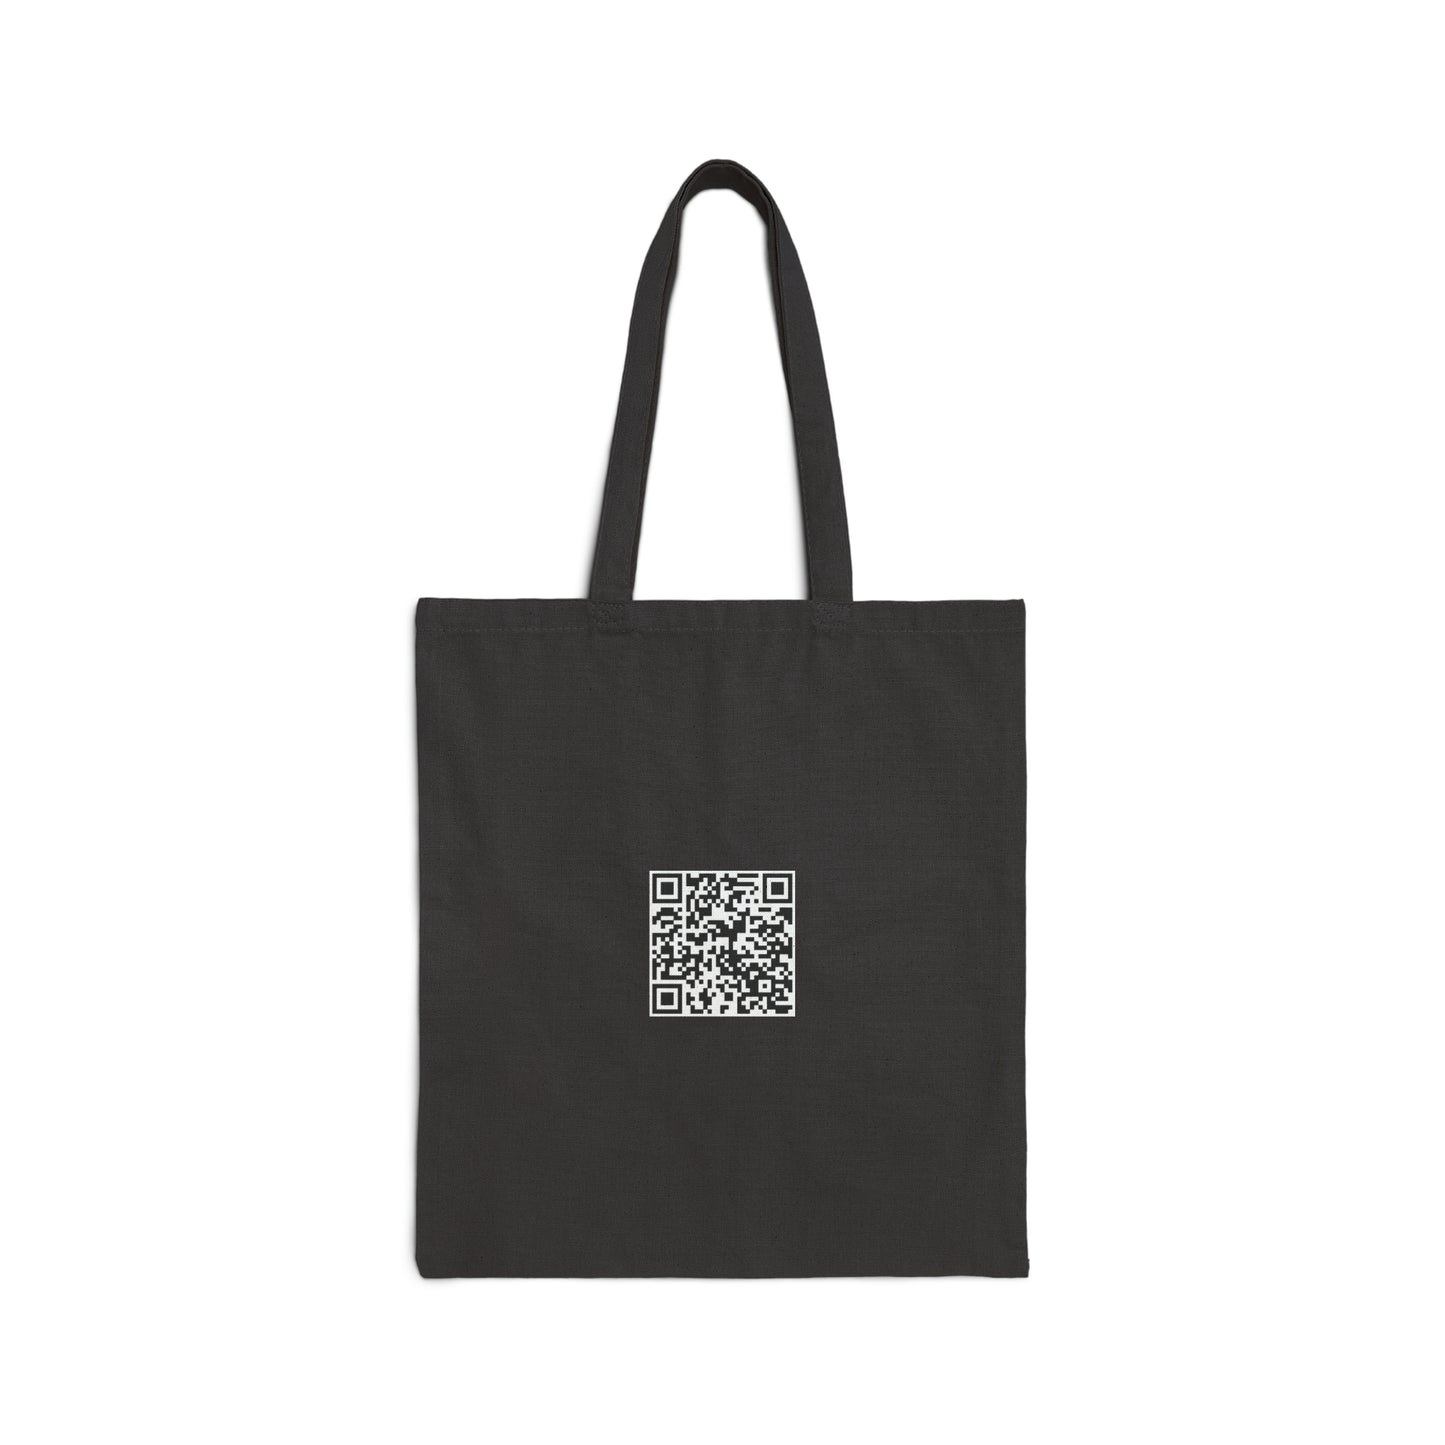 A Secret to Die For - Cotton Canvas Tote Bag